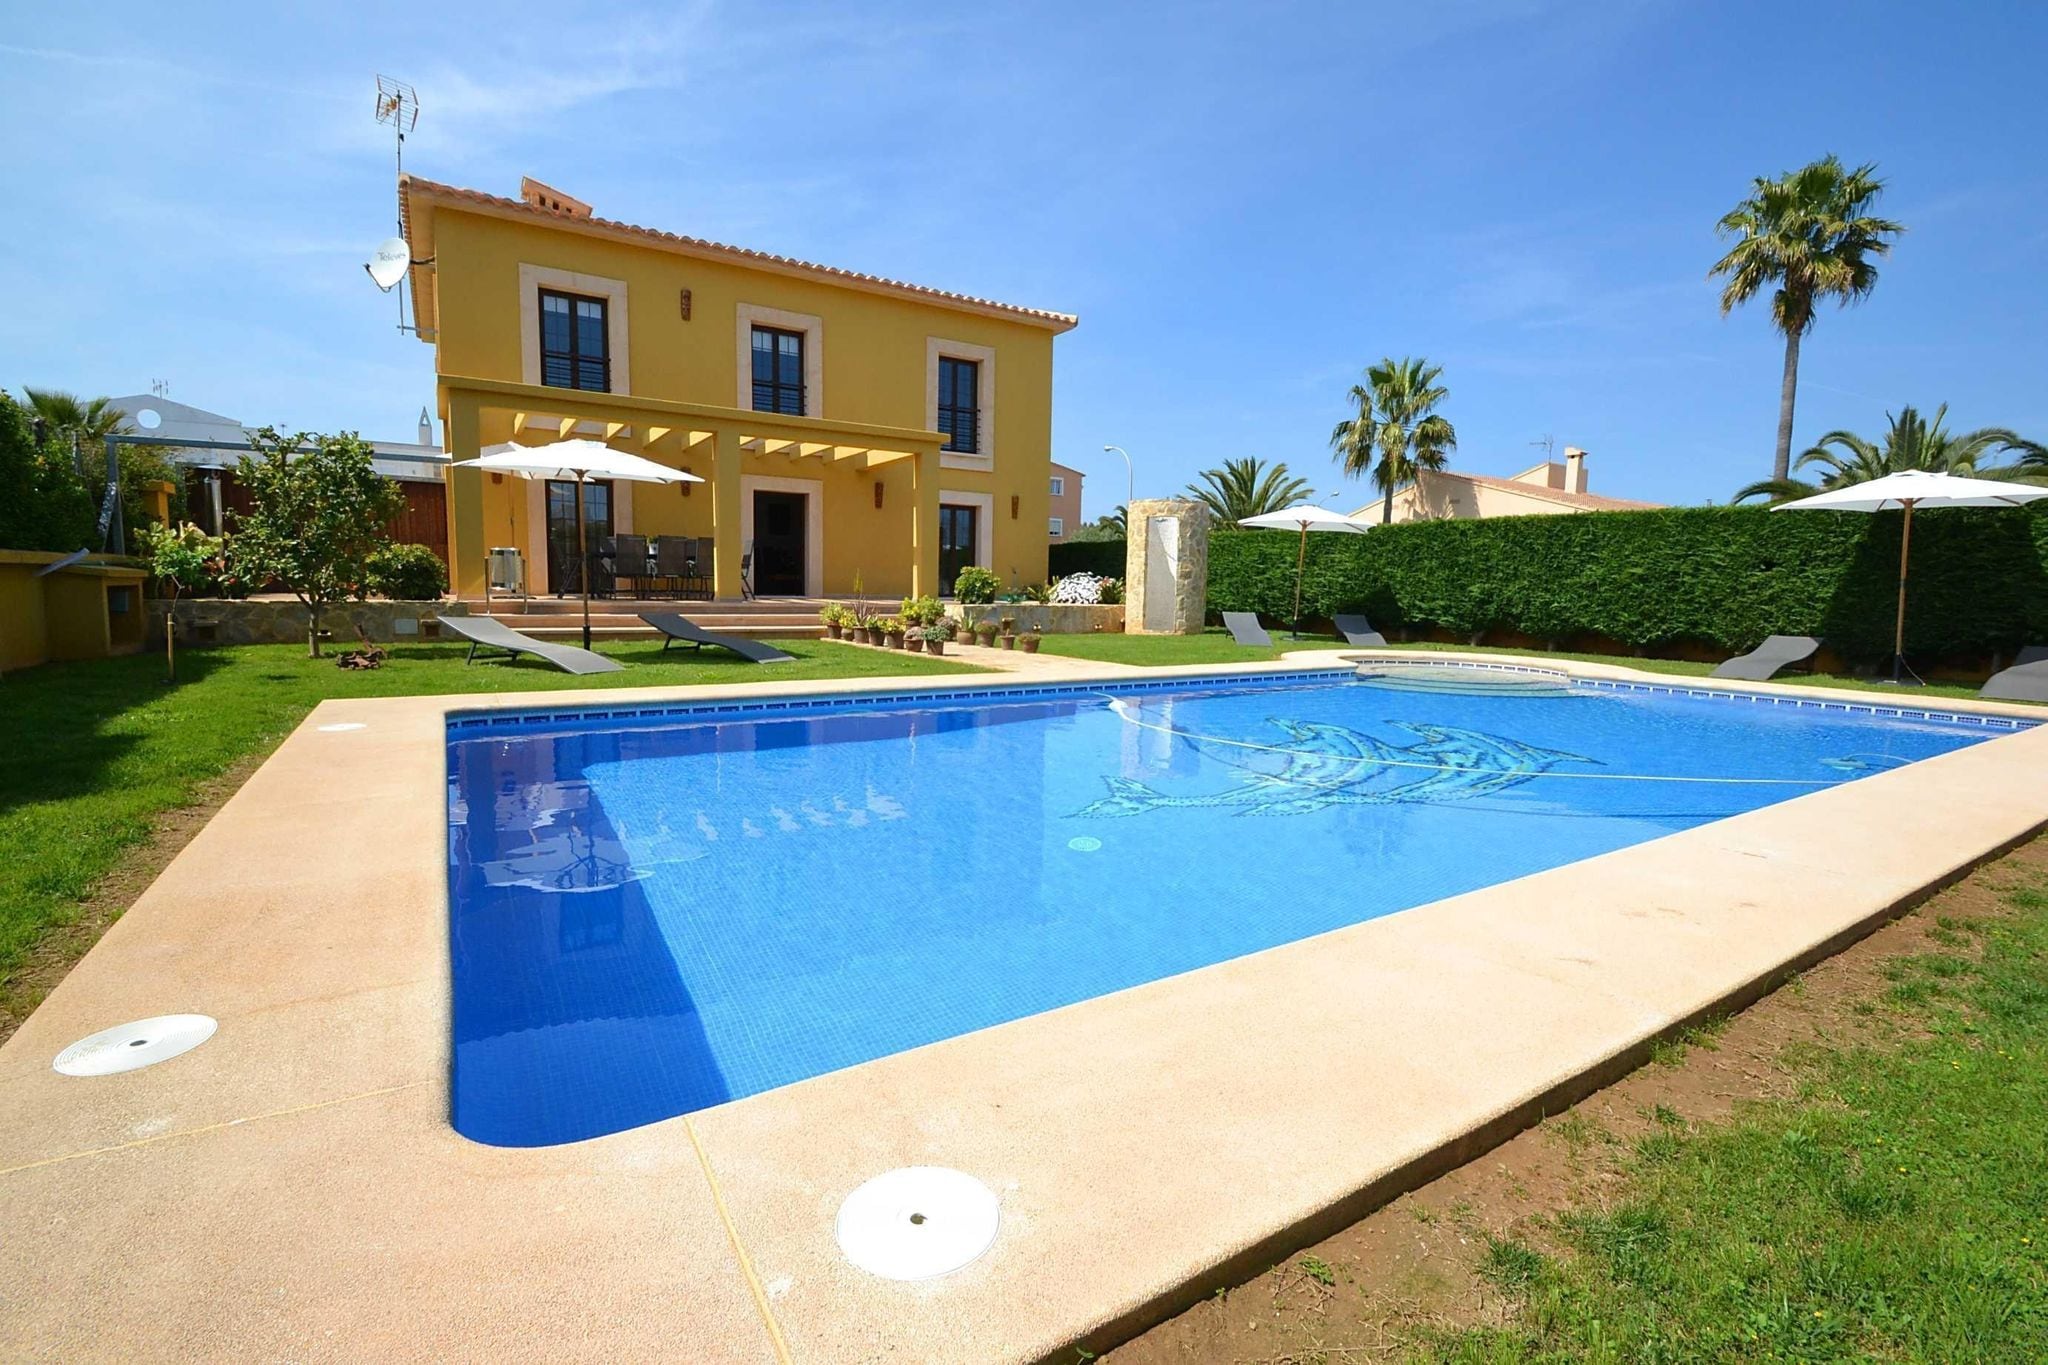 Cozy villa for 8 people with pool located near the sandy beach